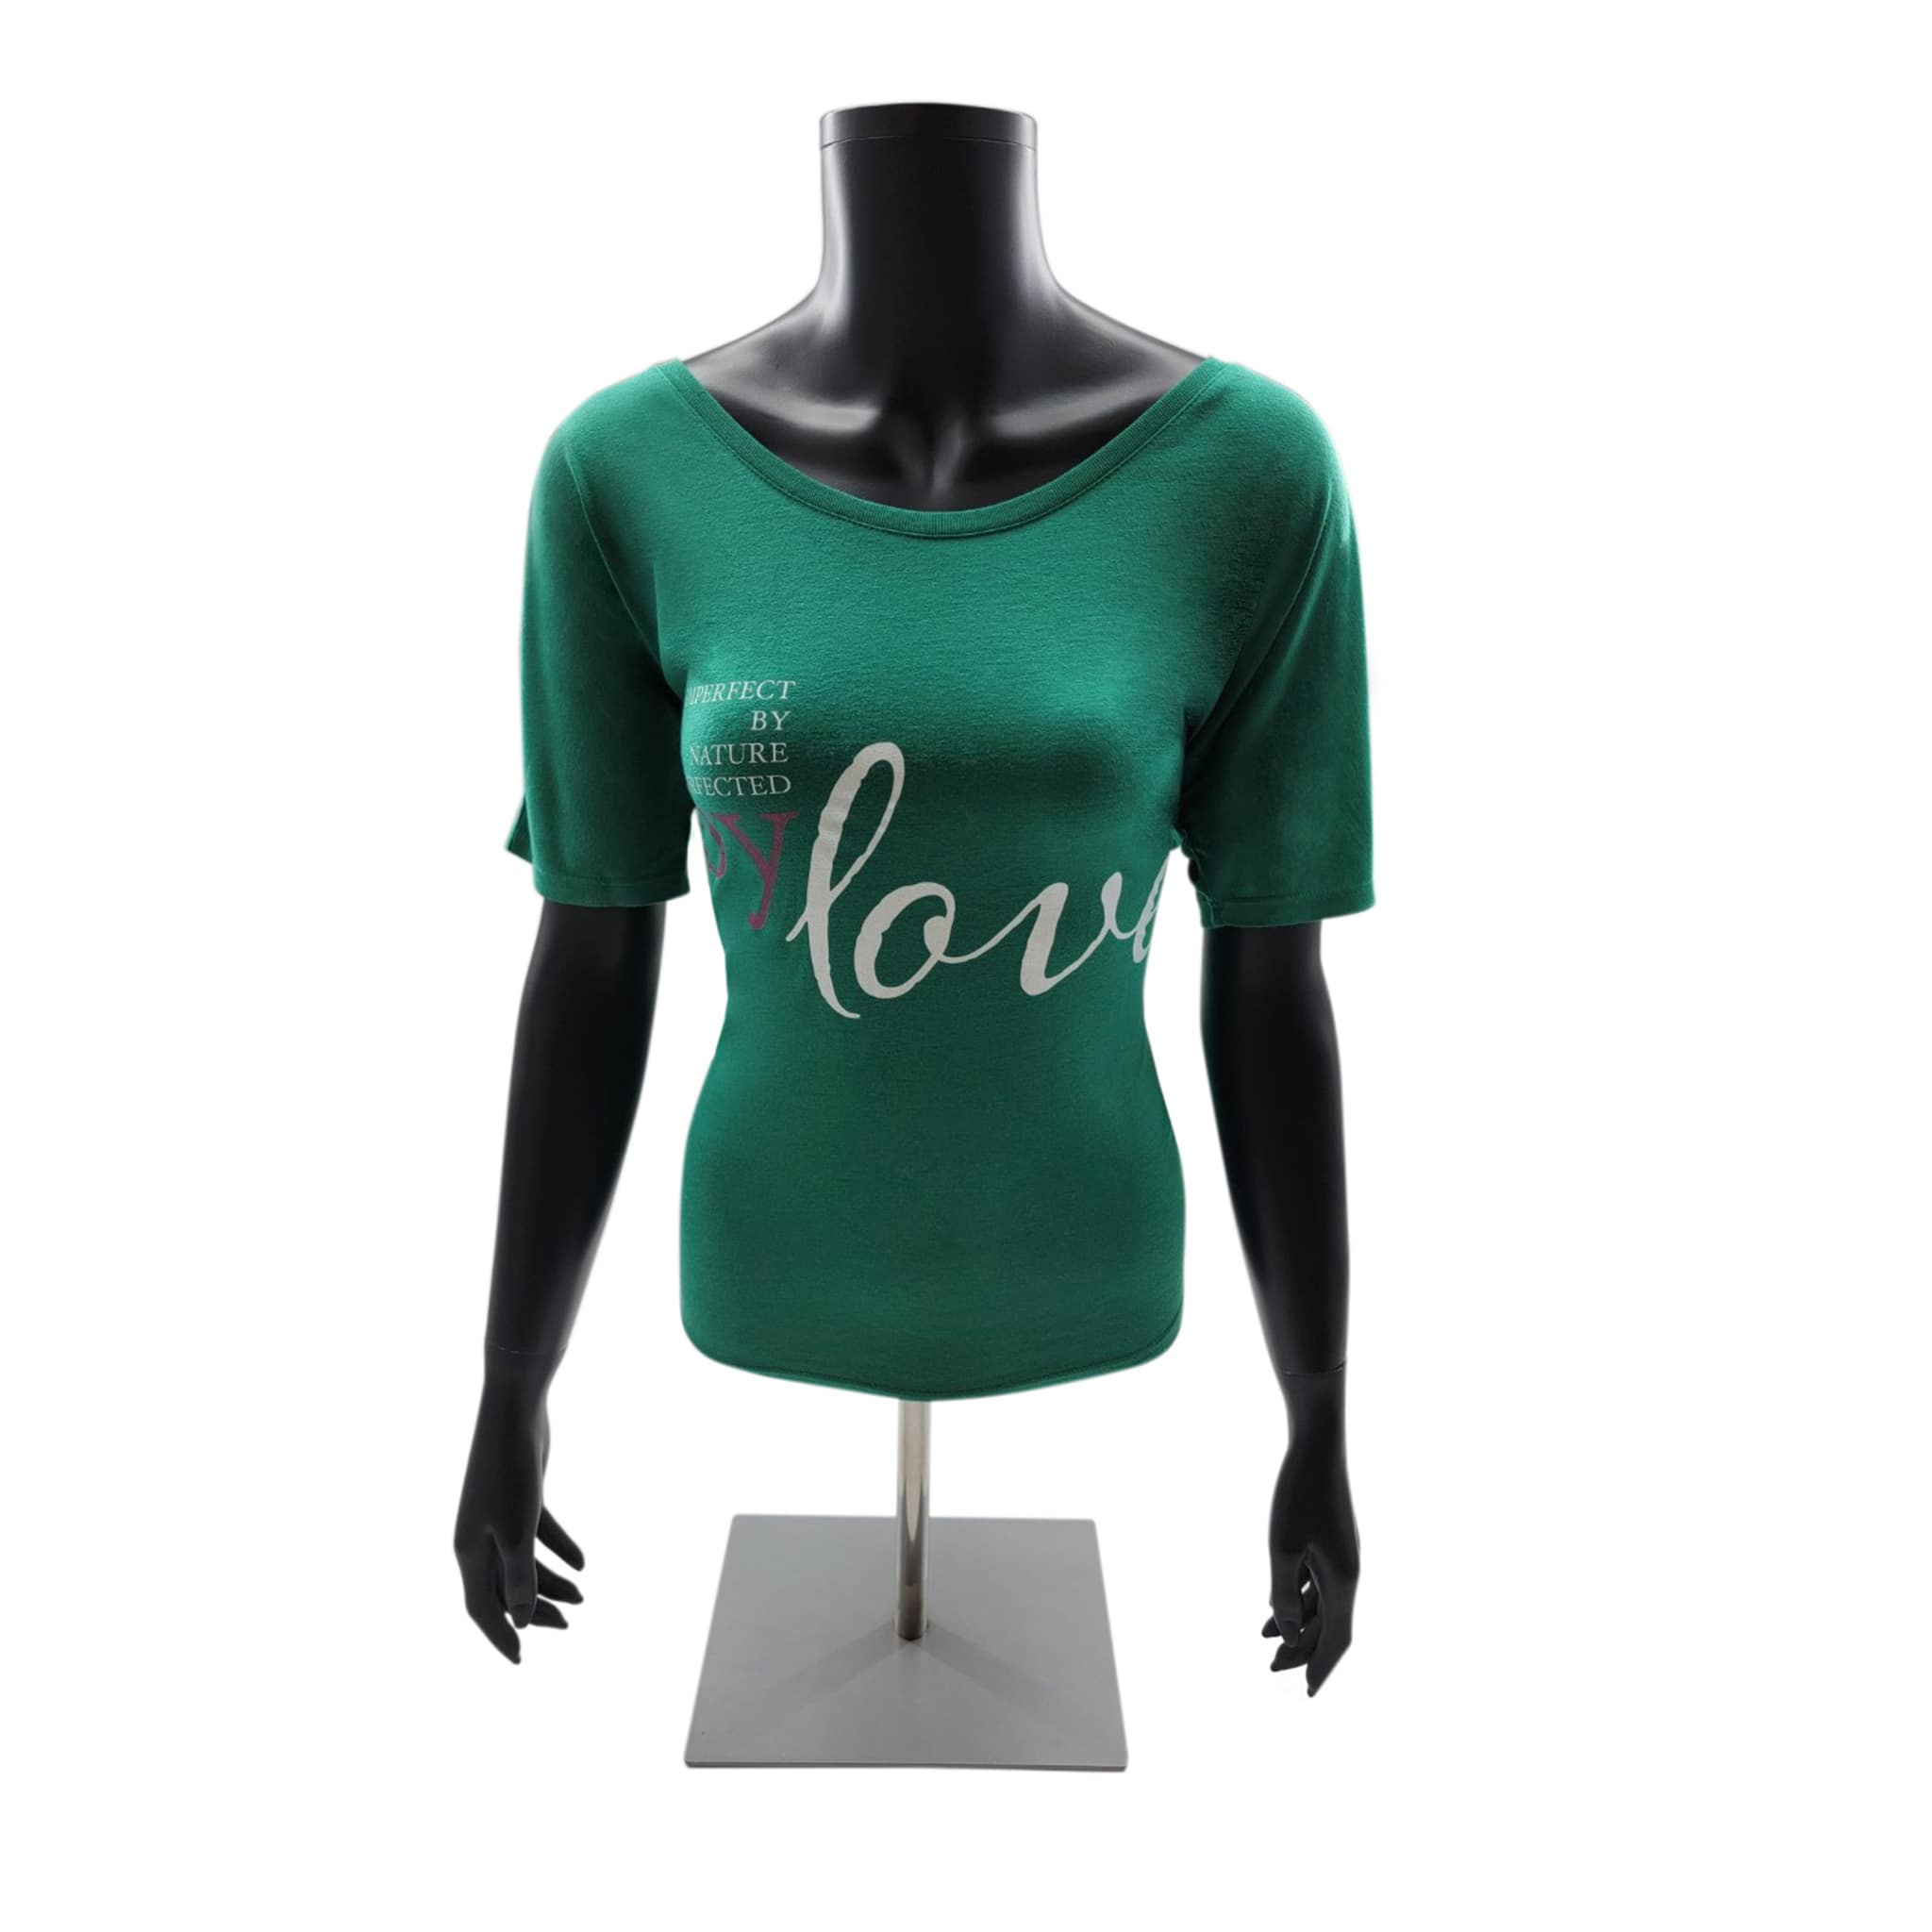 Rachel's Worth Imperfect-Perfected by Love Grn Tee